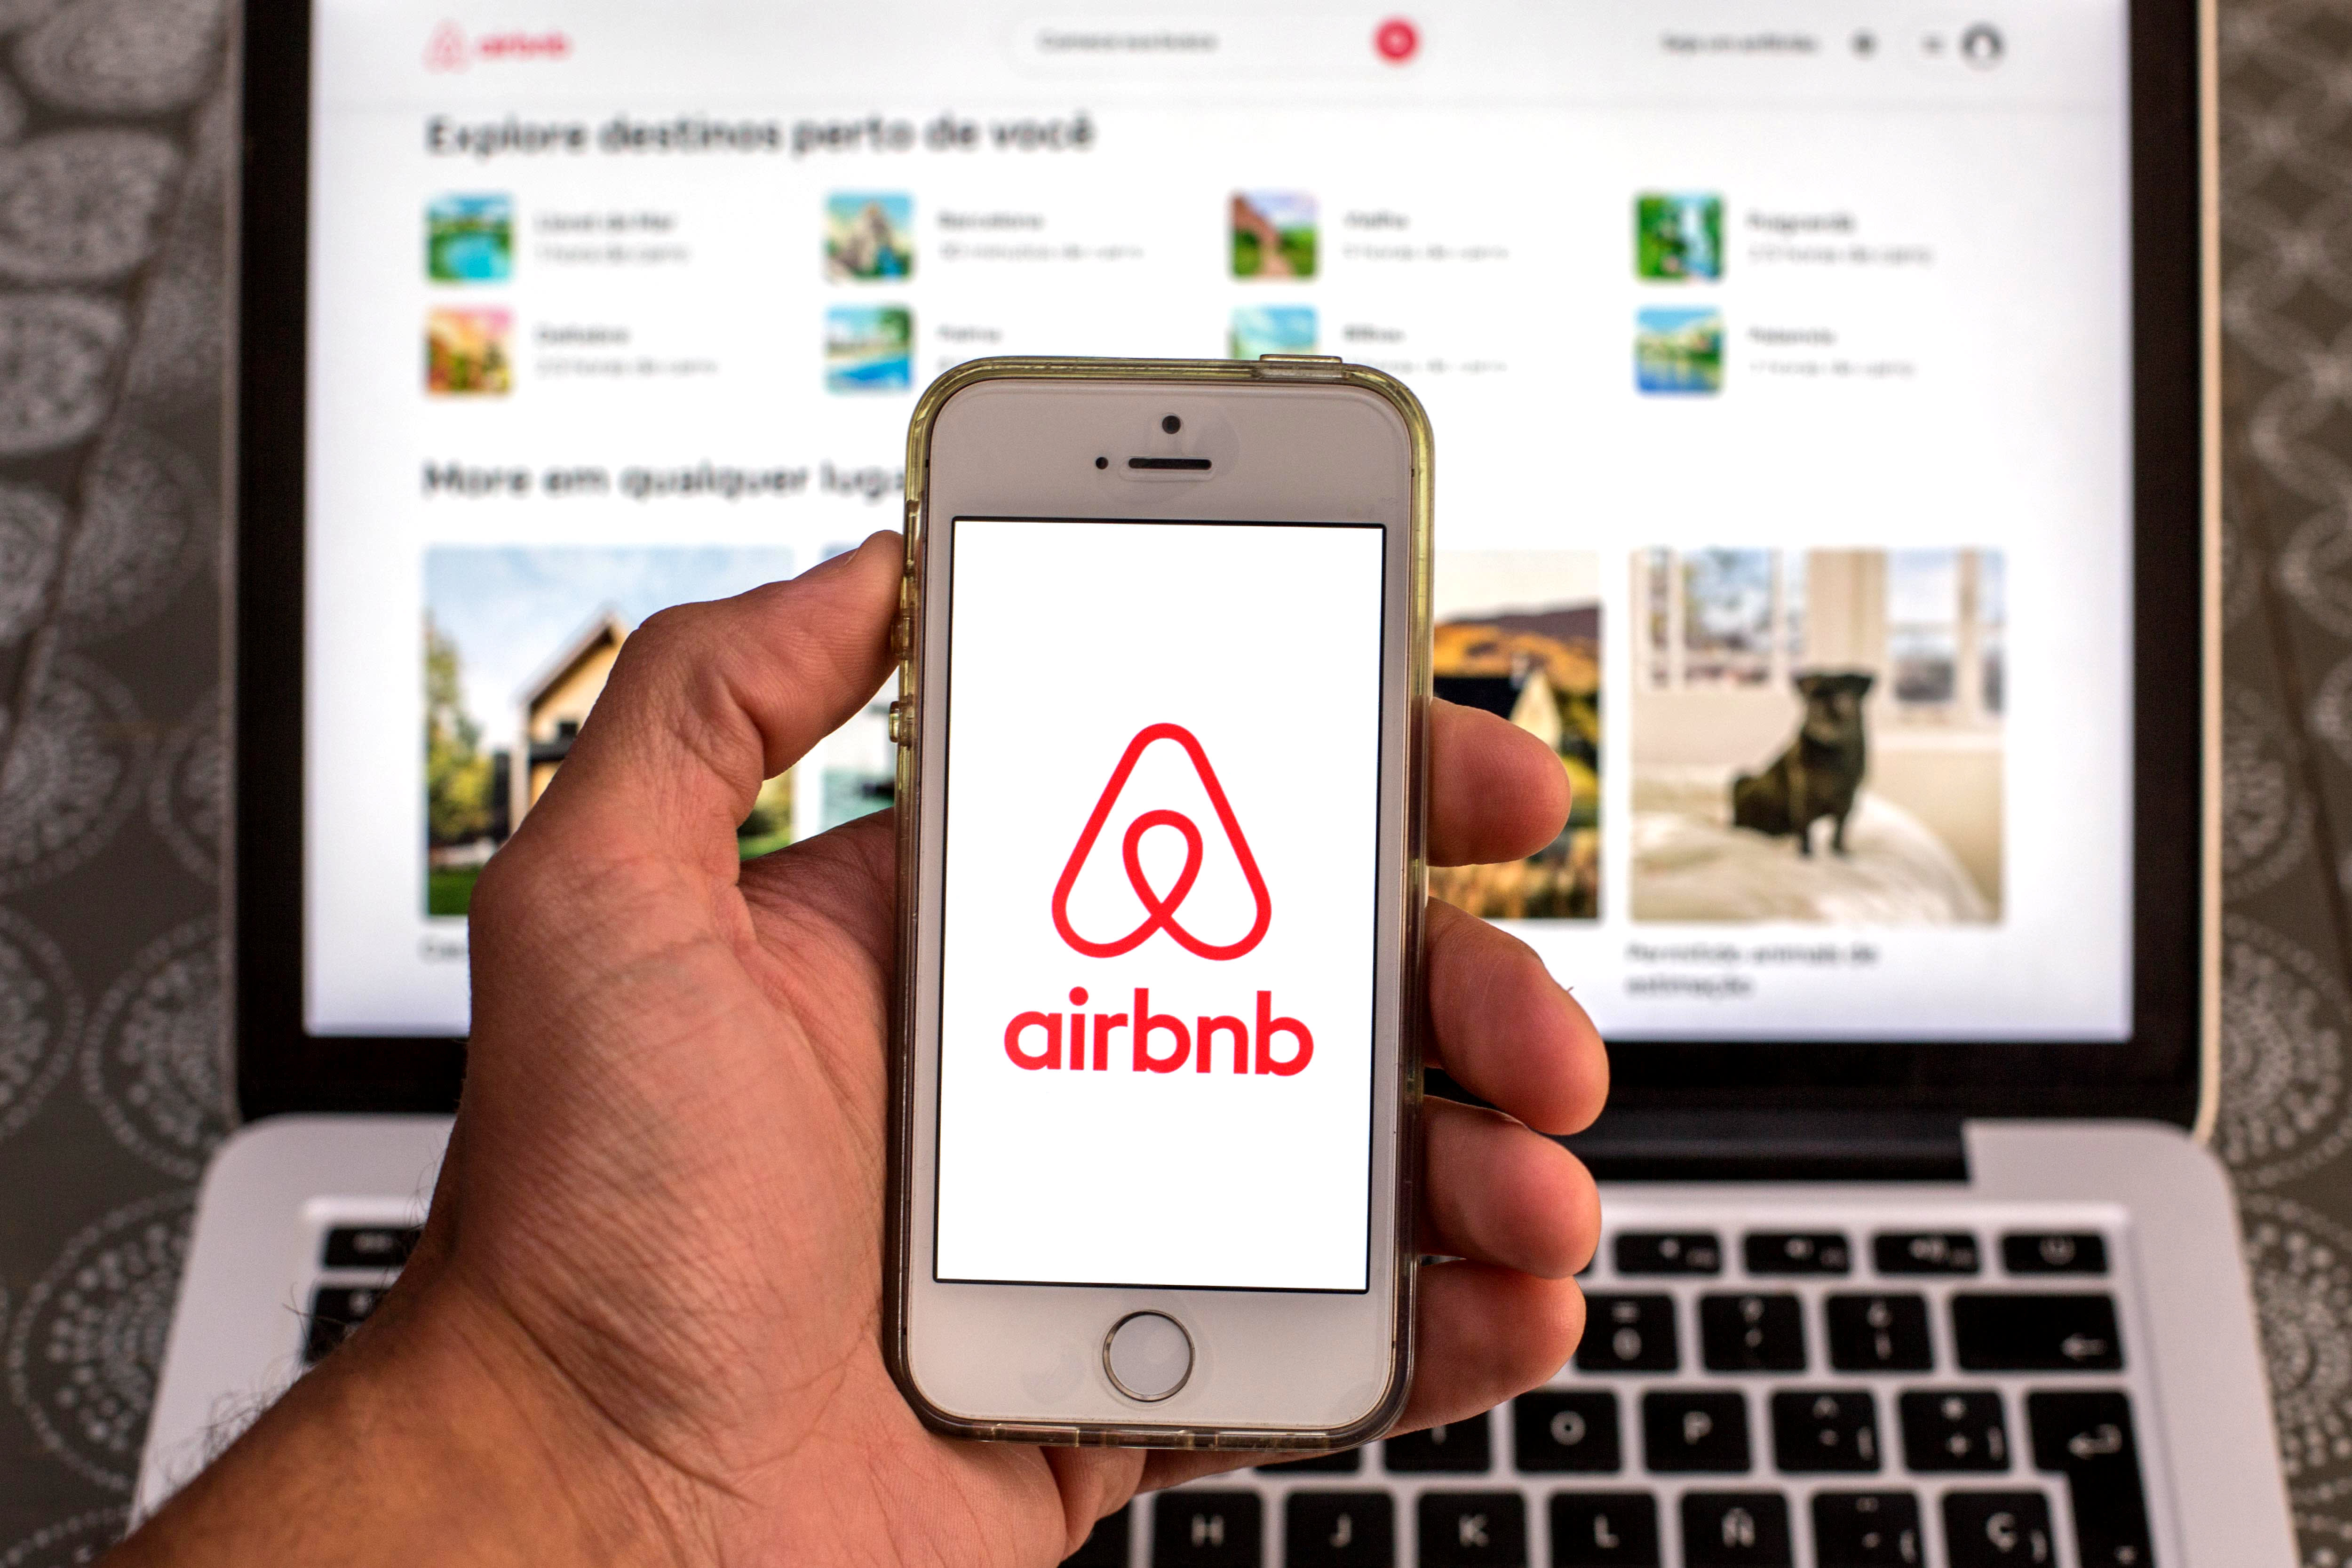 Airbnb is a buy as it could soon become the largest Western travel company, says Bernstein